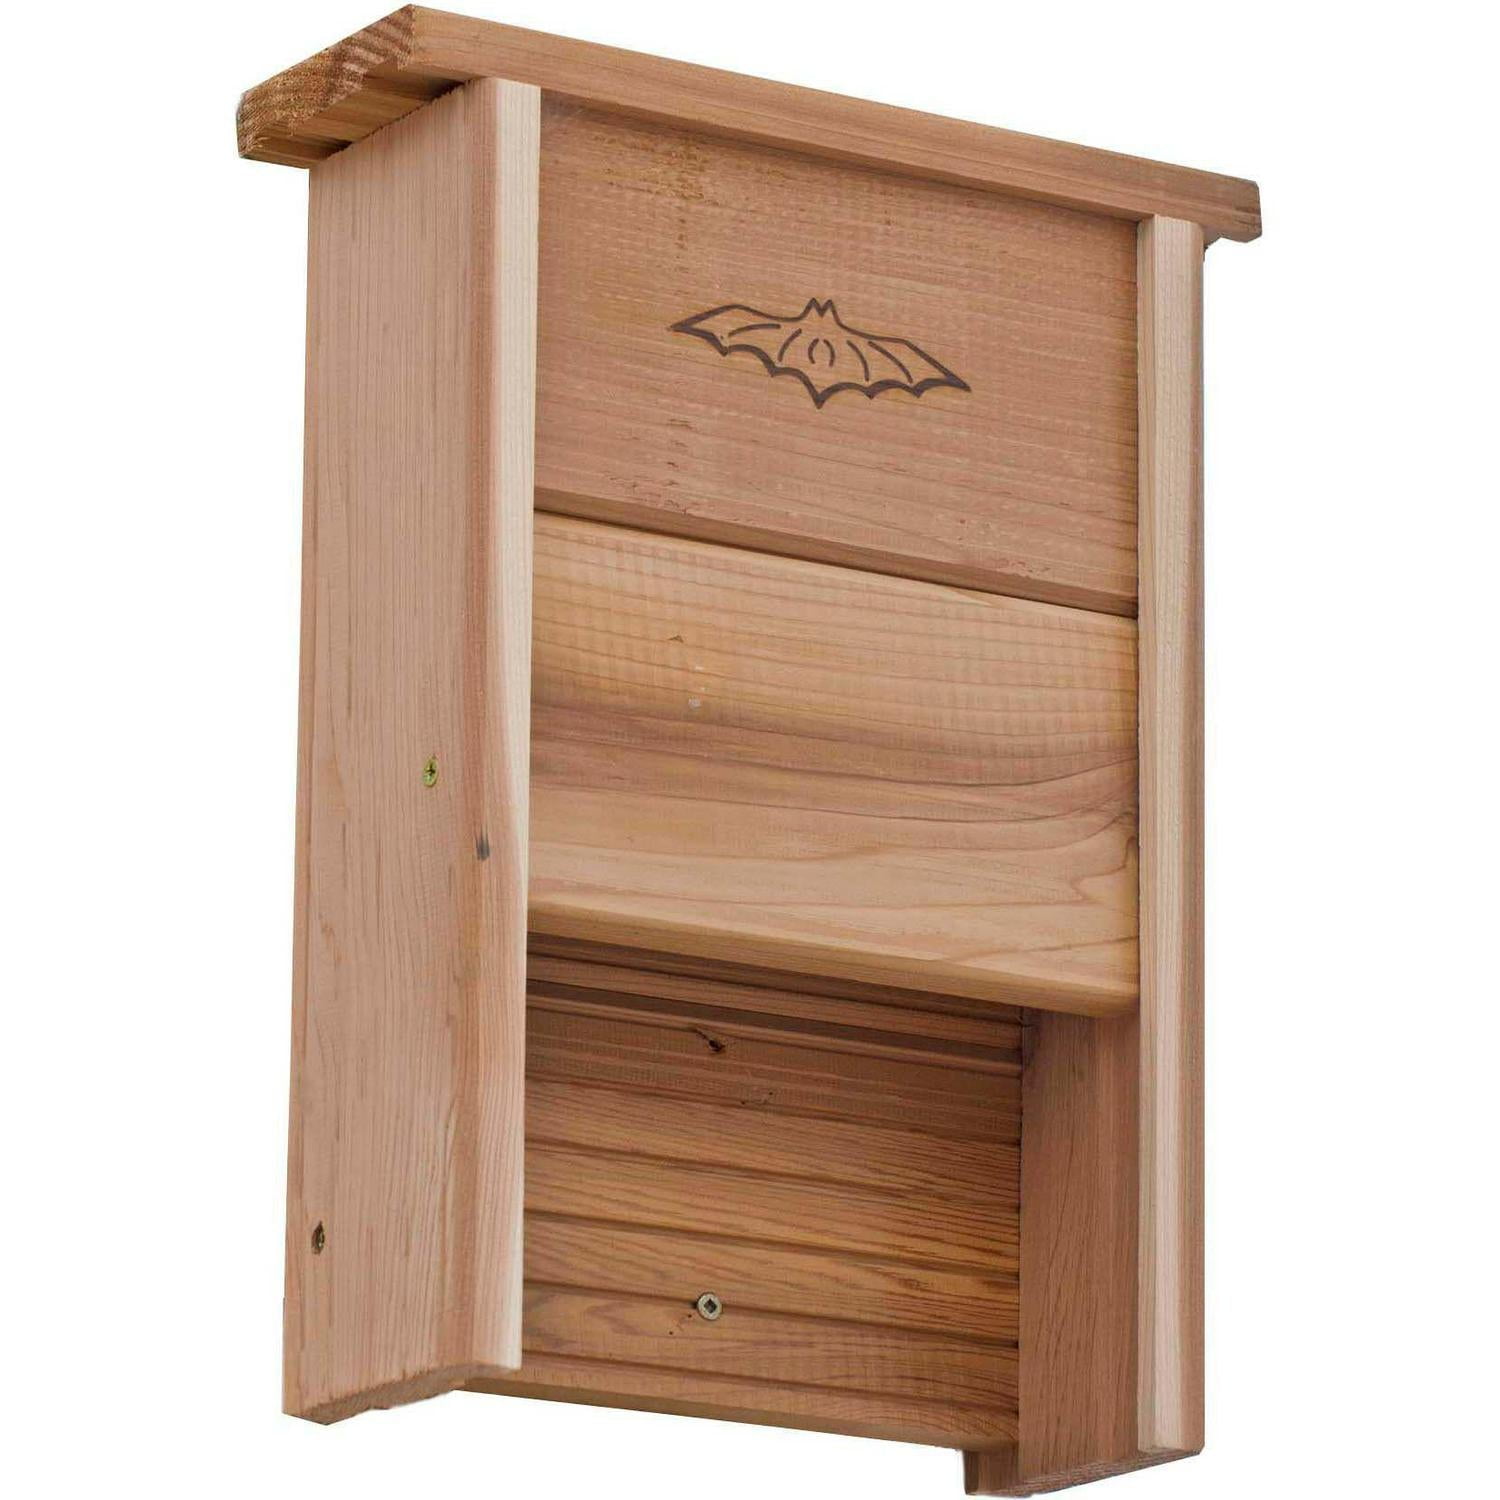 L Cedar  Bat House Shelter H x 12 in W x 4.25 in Details about   Royal Wing  16 in 